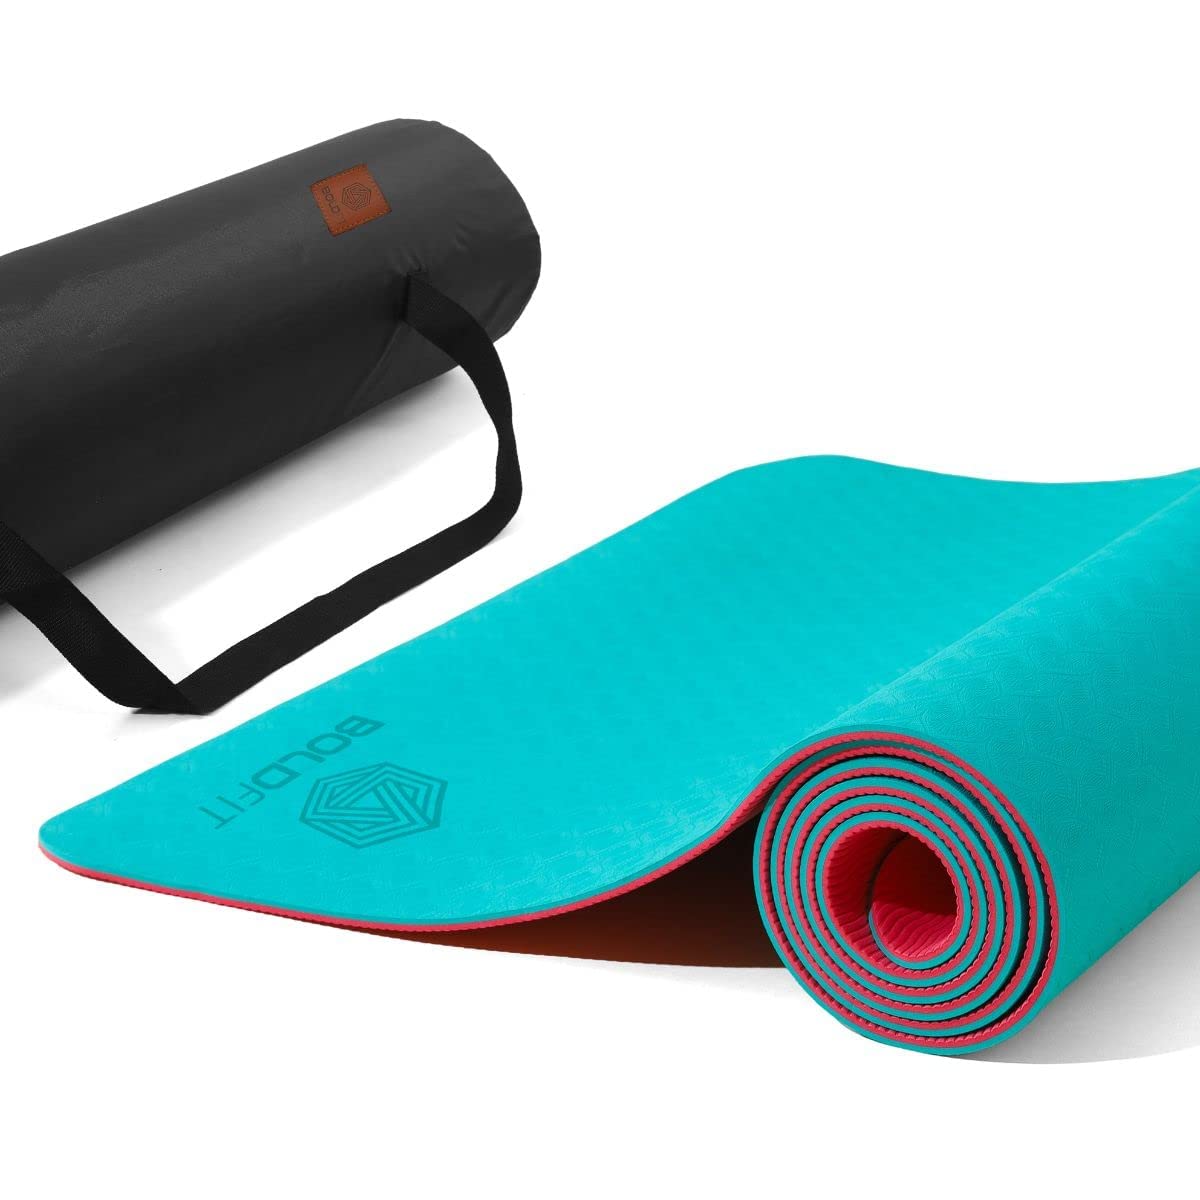 Gym, Running & Yoga Accessories, Gym Bags & Mats